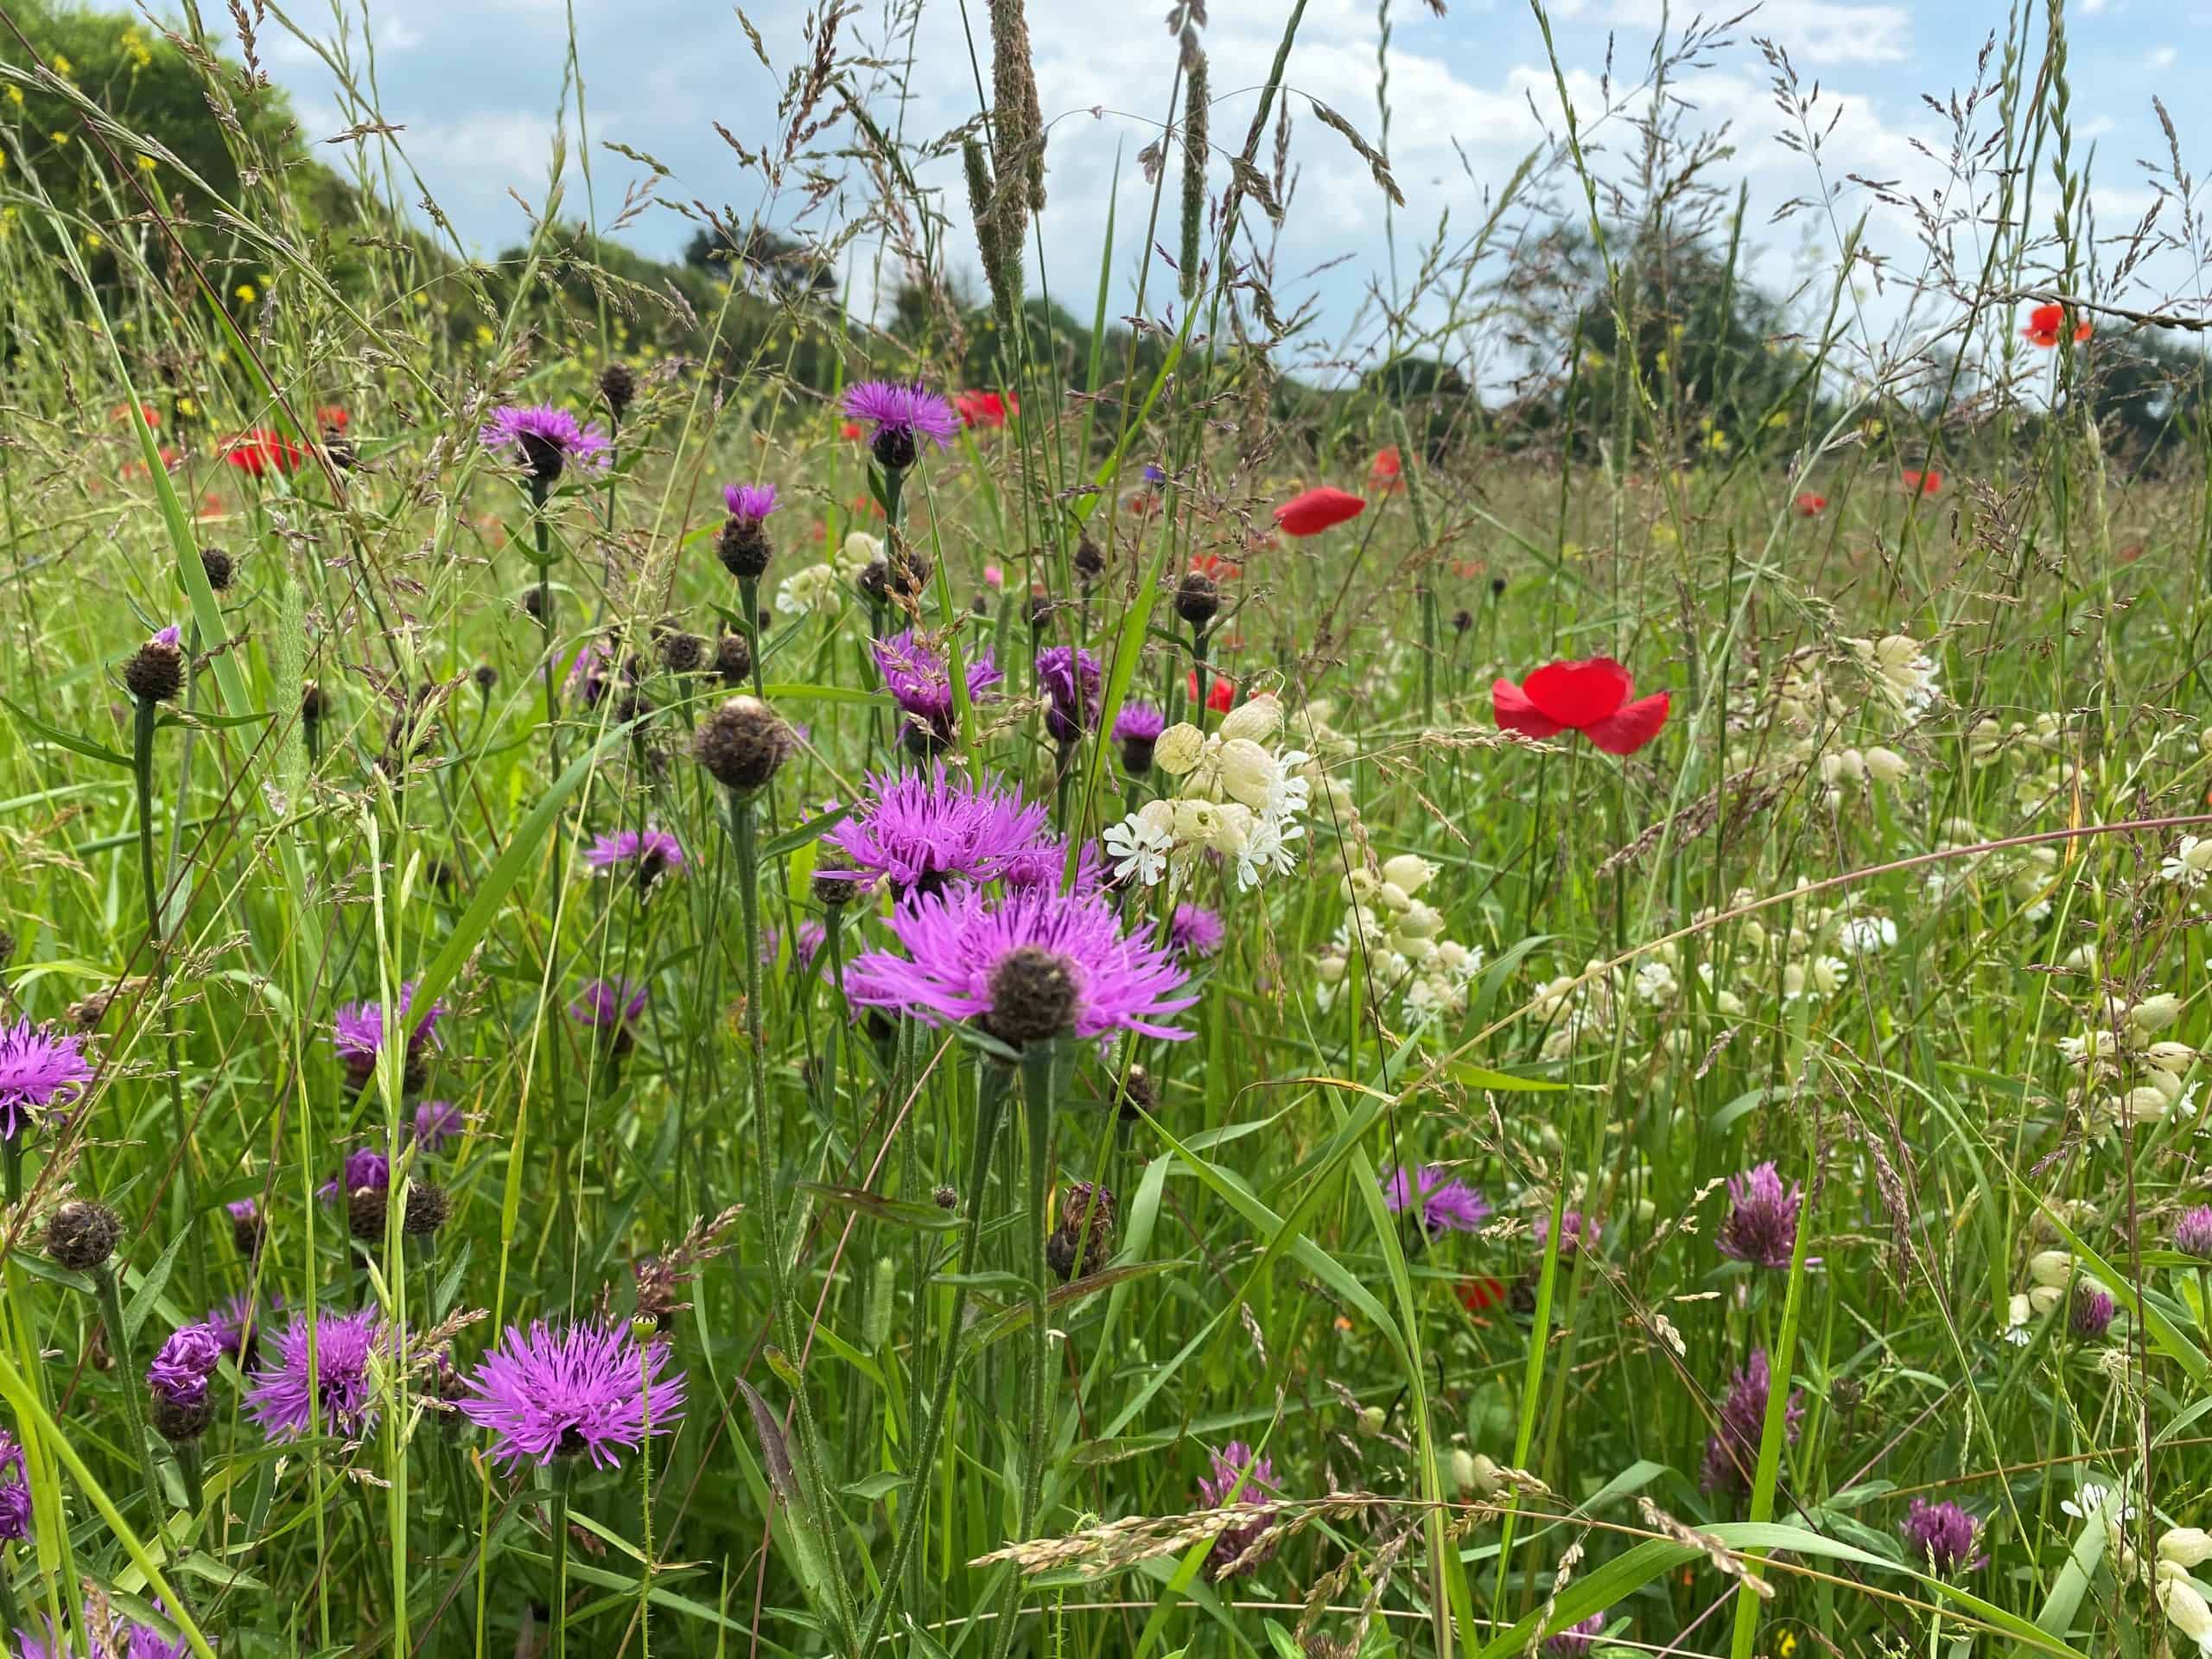 Poppies, scabious and bladder campion at RPG wildflower area July 2021